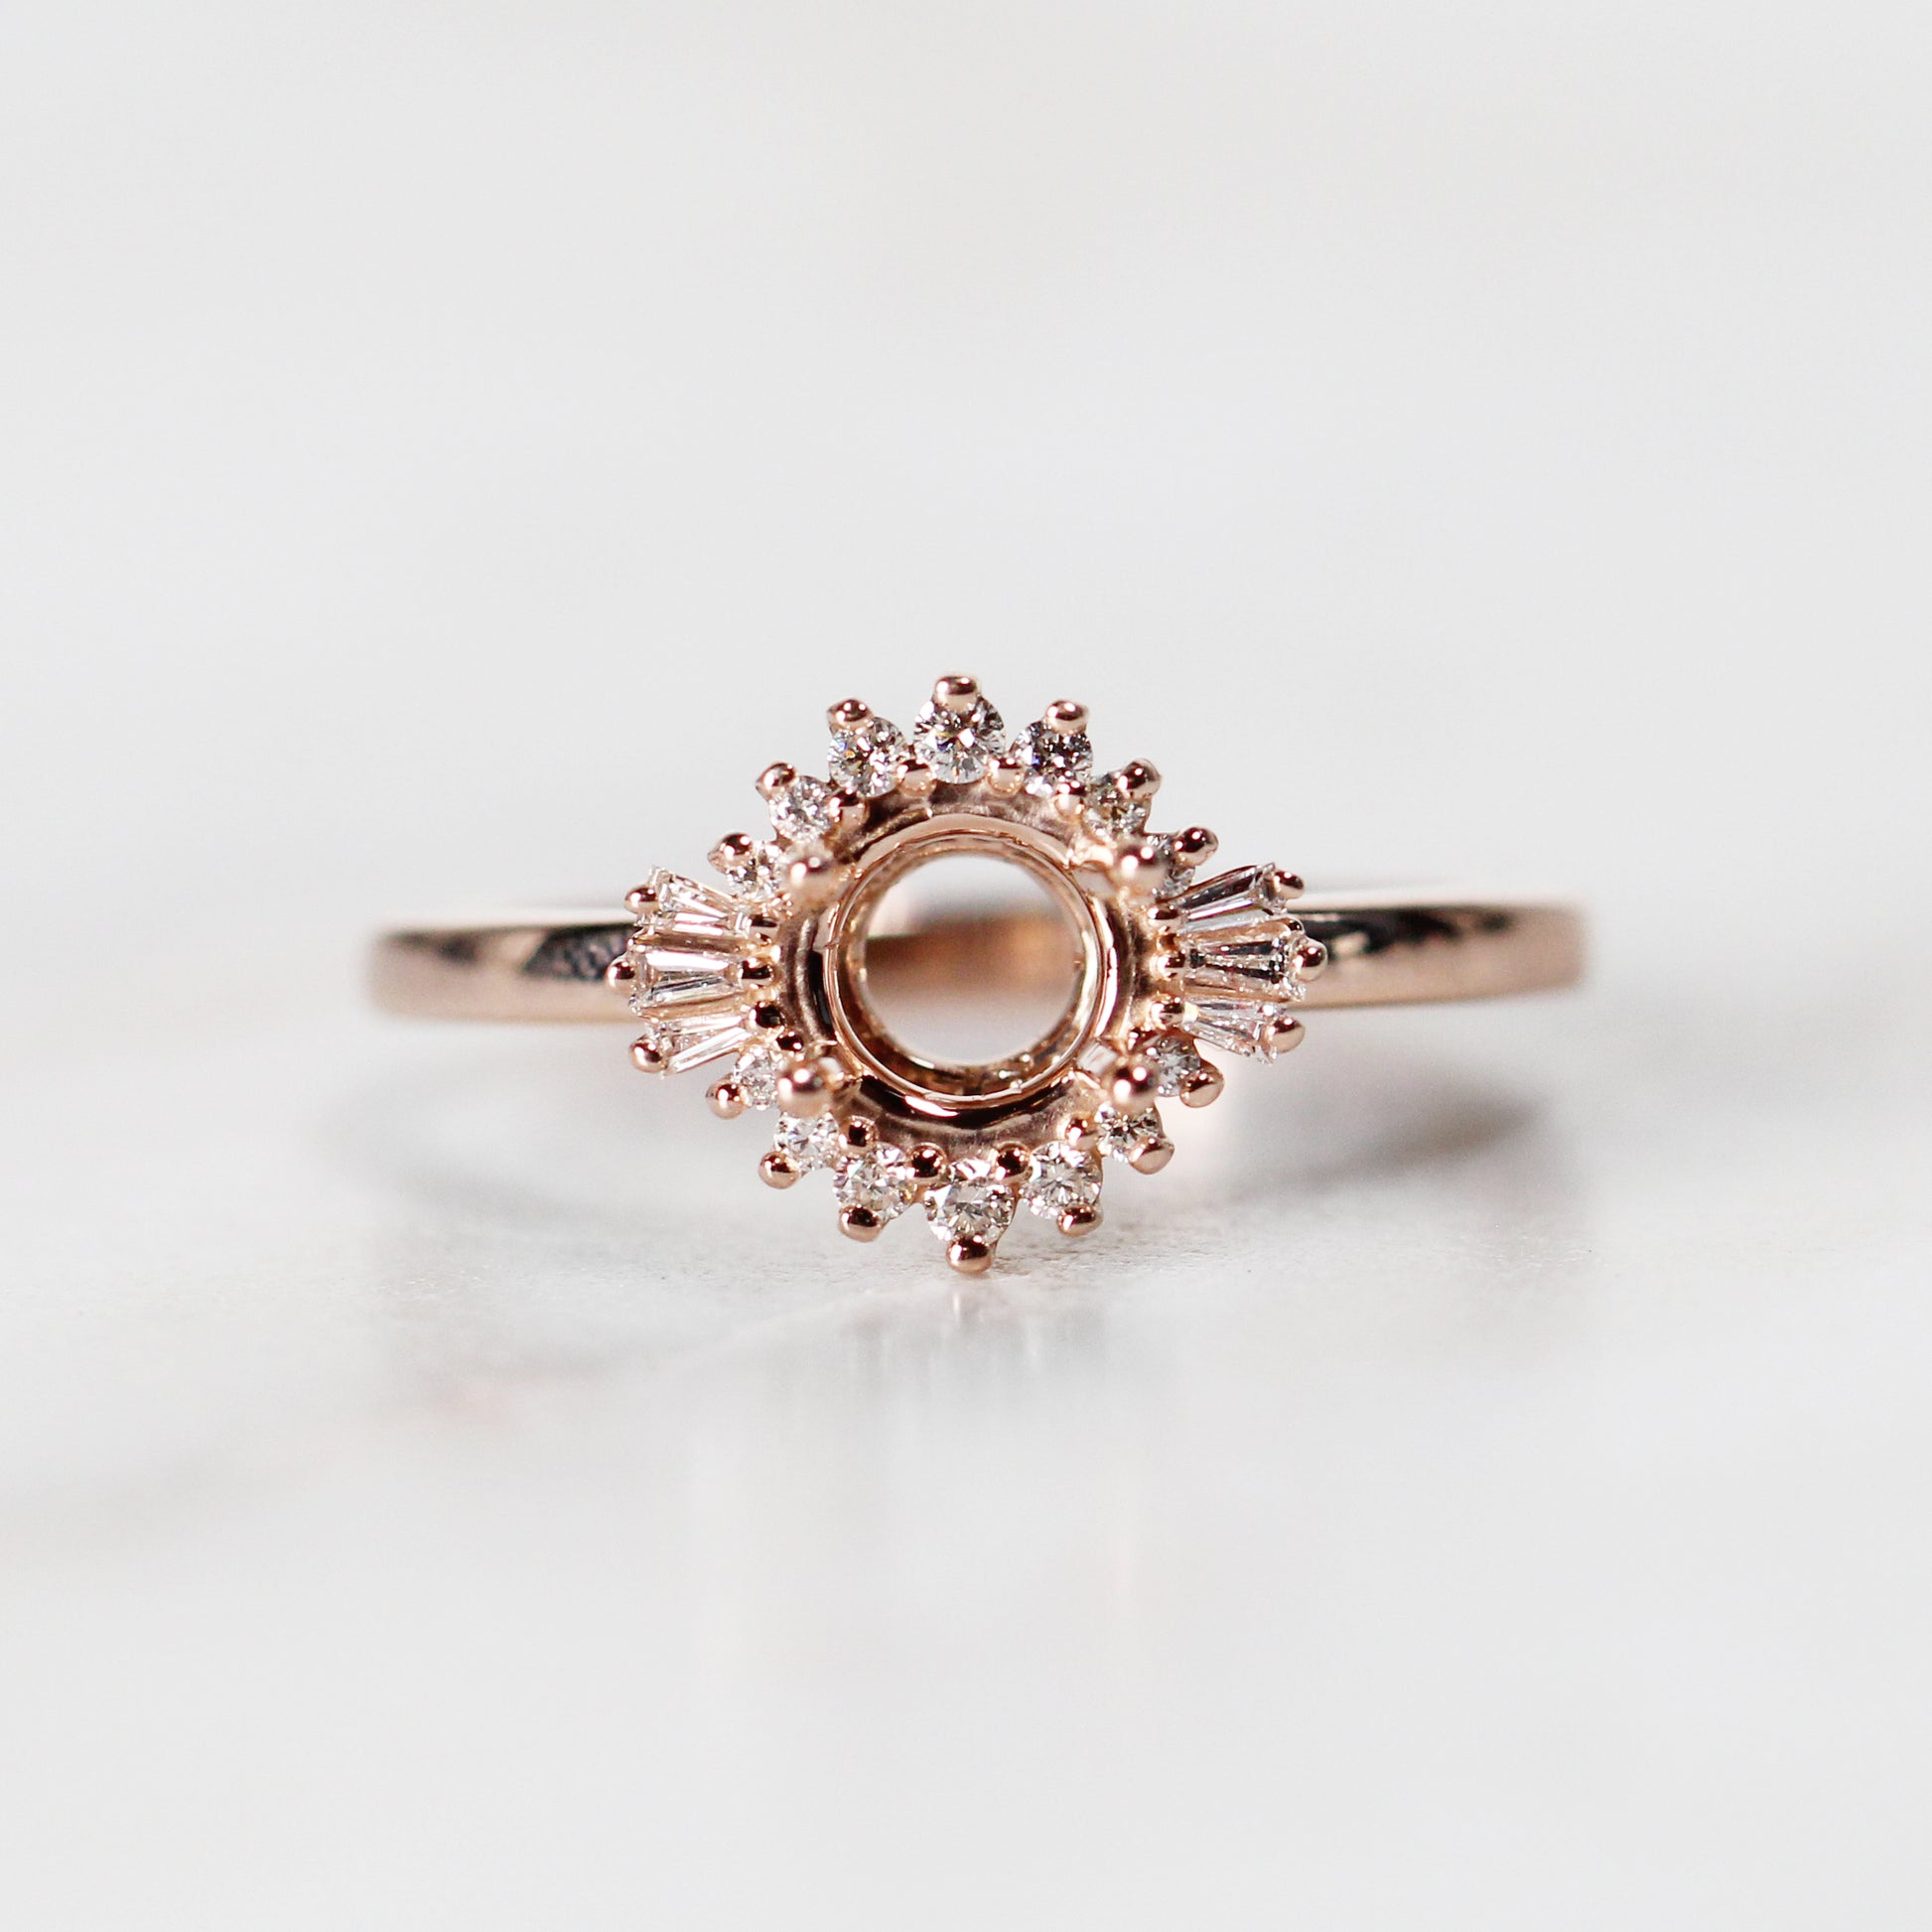 Dean Setting - Midwinter Co. Alternative Bridal Rings and Modern Fine Jewelry